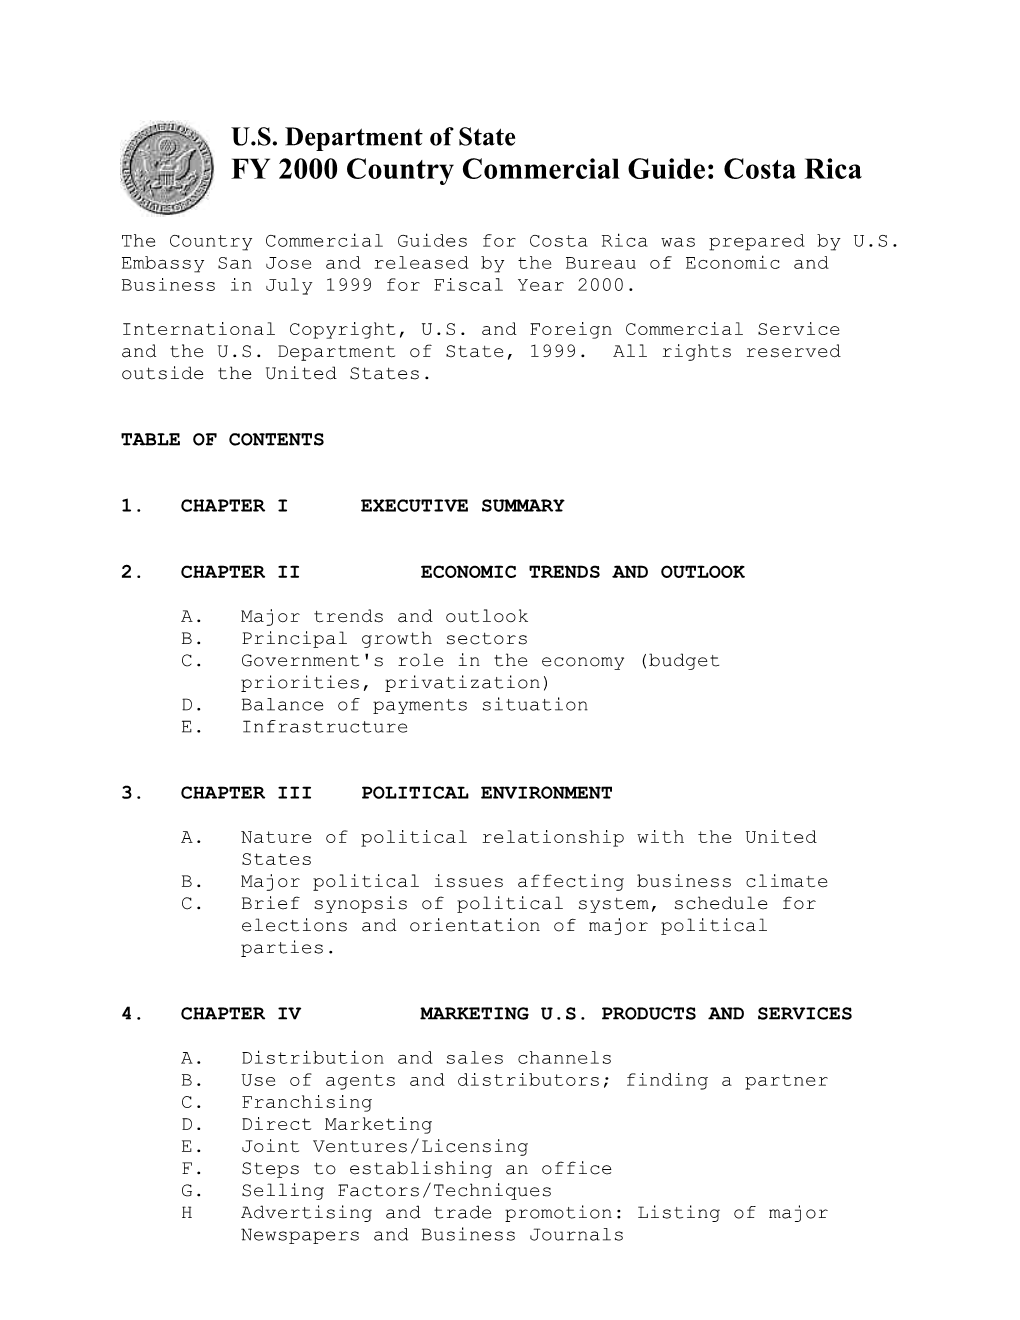 FY 2000 Country Commercial Guide: Costa Rica